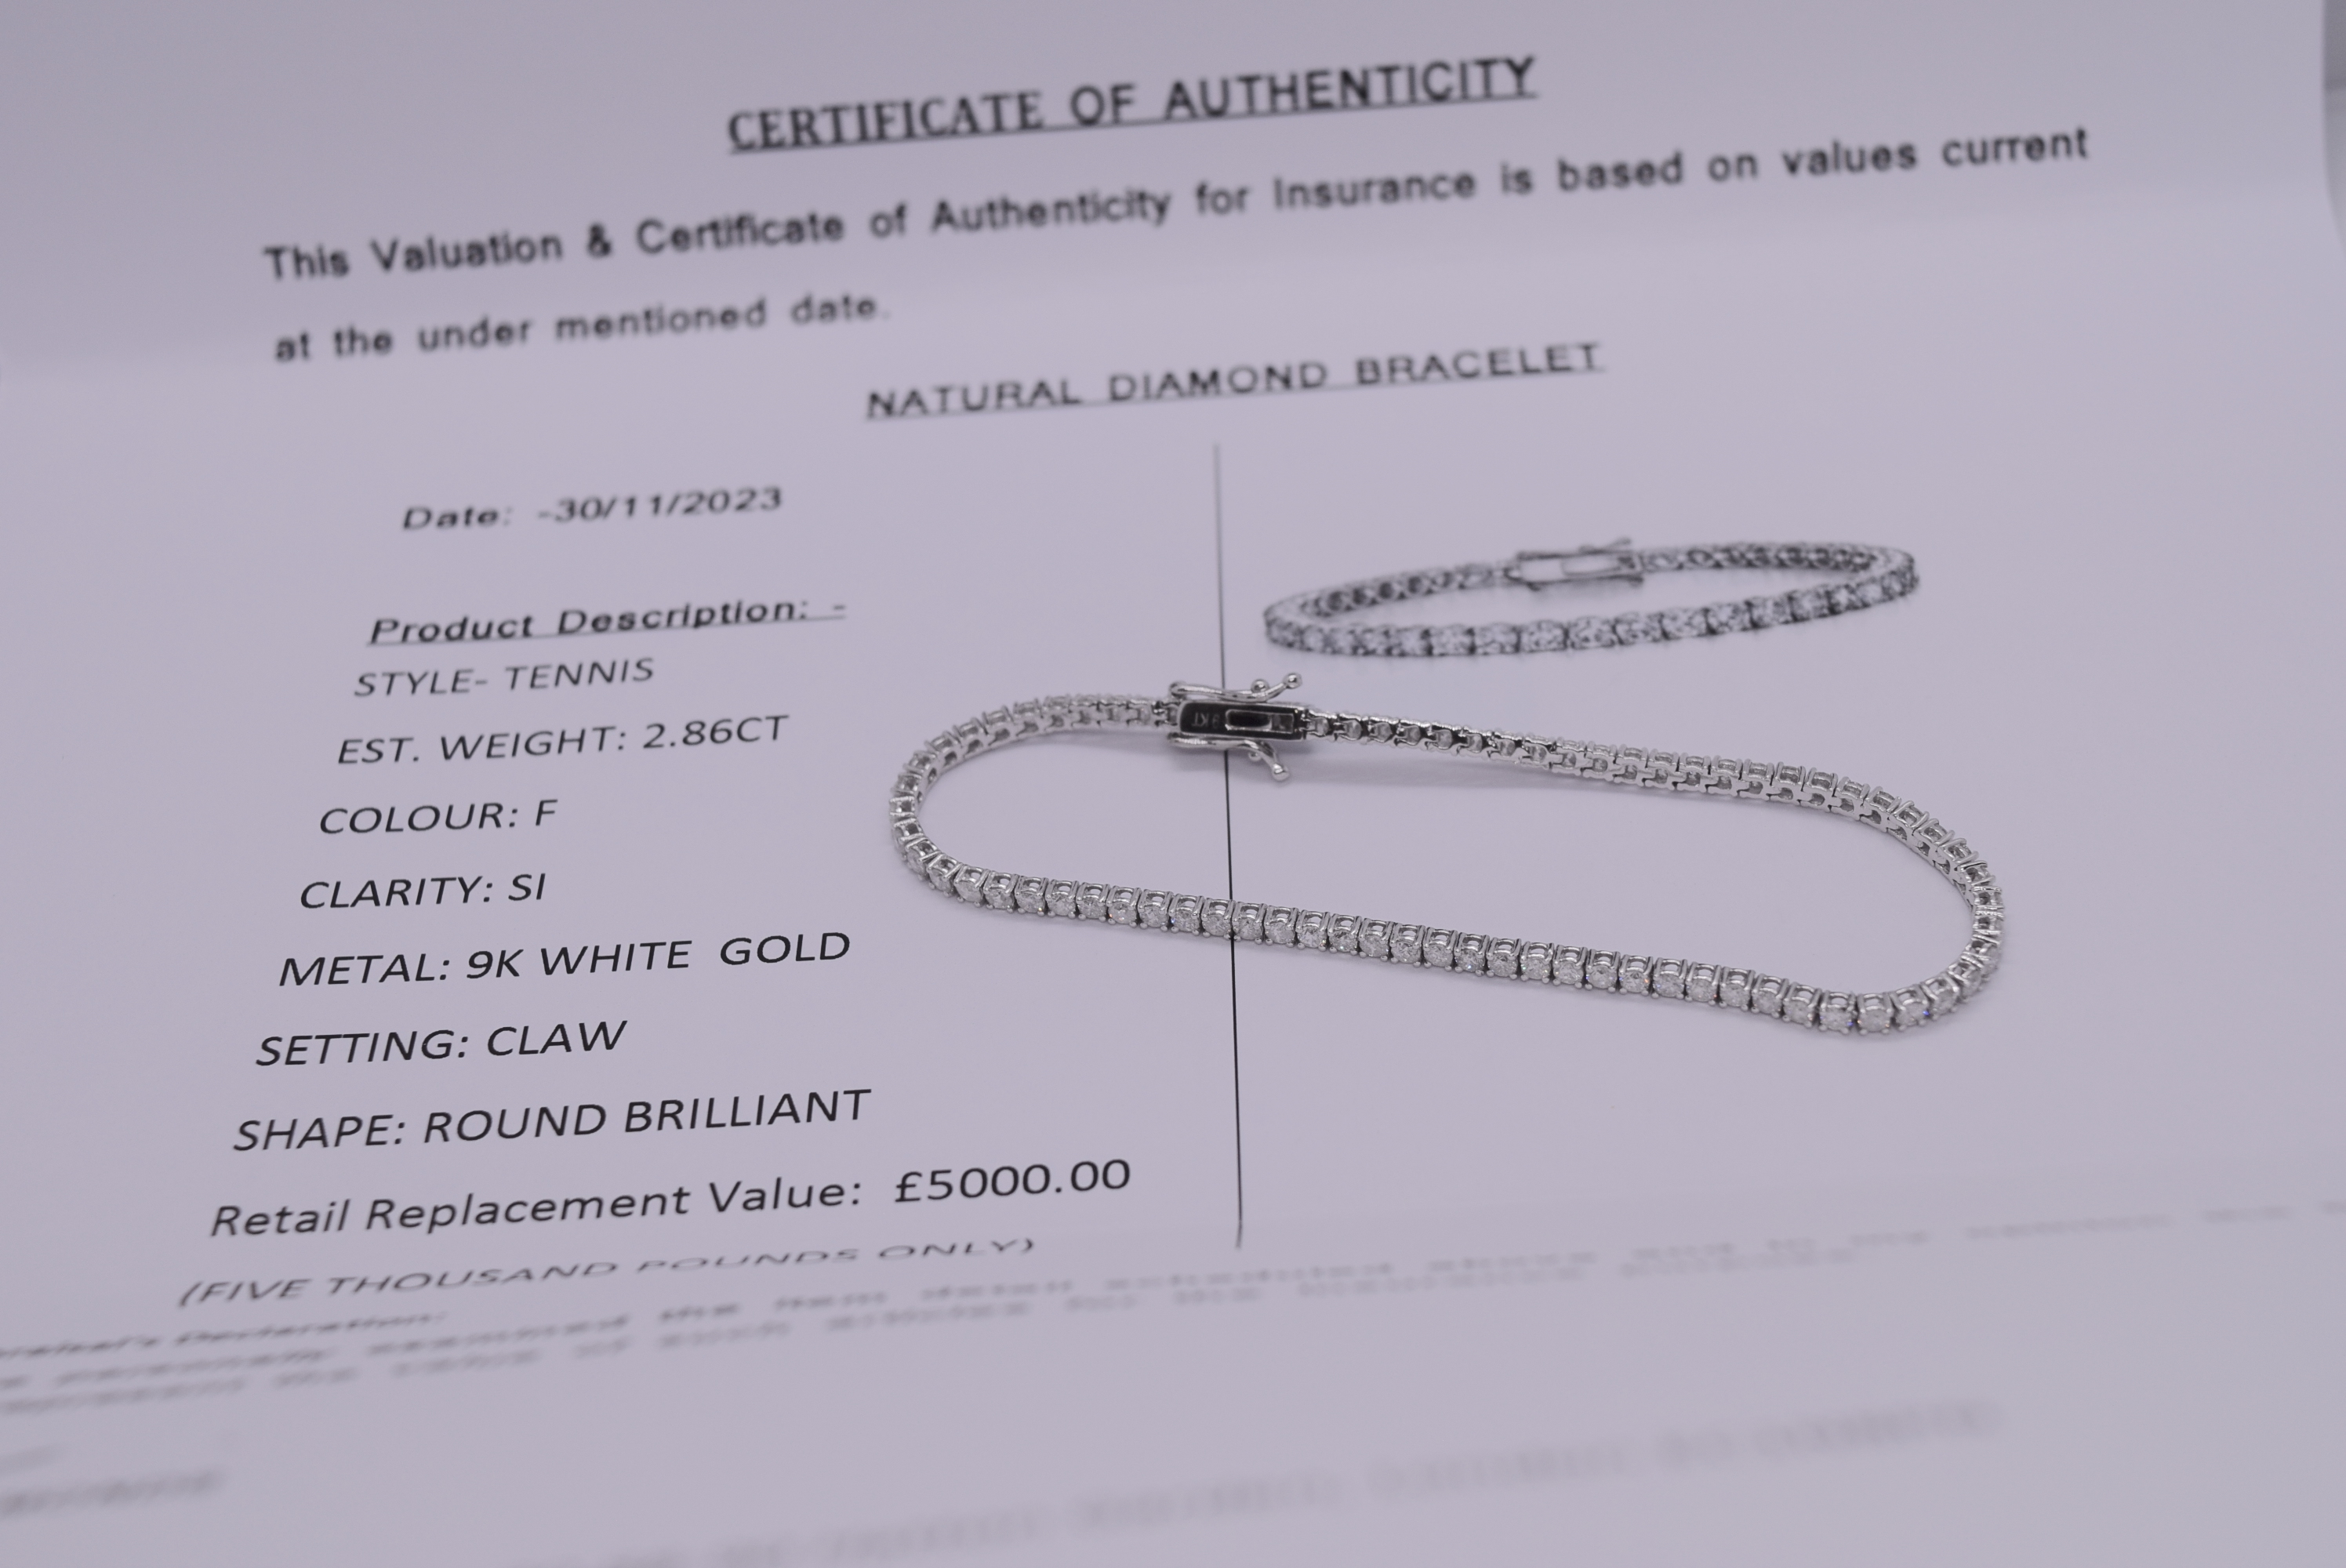 2.86CT DIAMOND TENNIS BRACELET IN WHITE GOLD (SI CLARITY/ F COLOUR) £5,000.00 VALUATION CERTIFICATE - Image 3 of 6